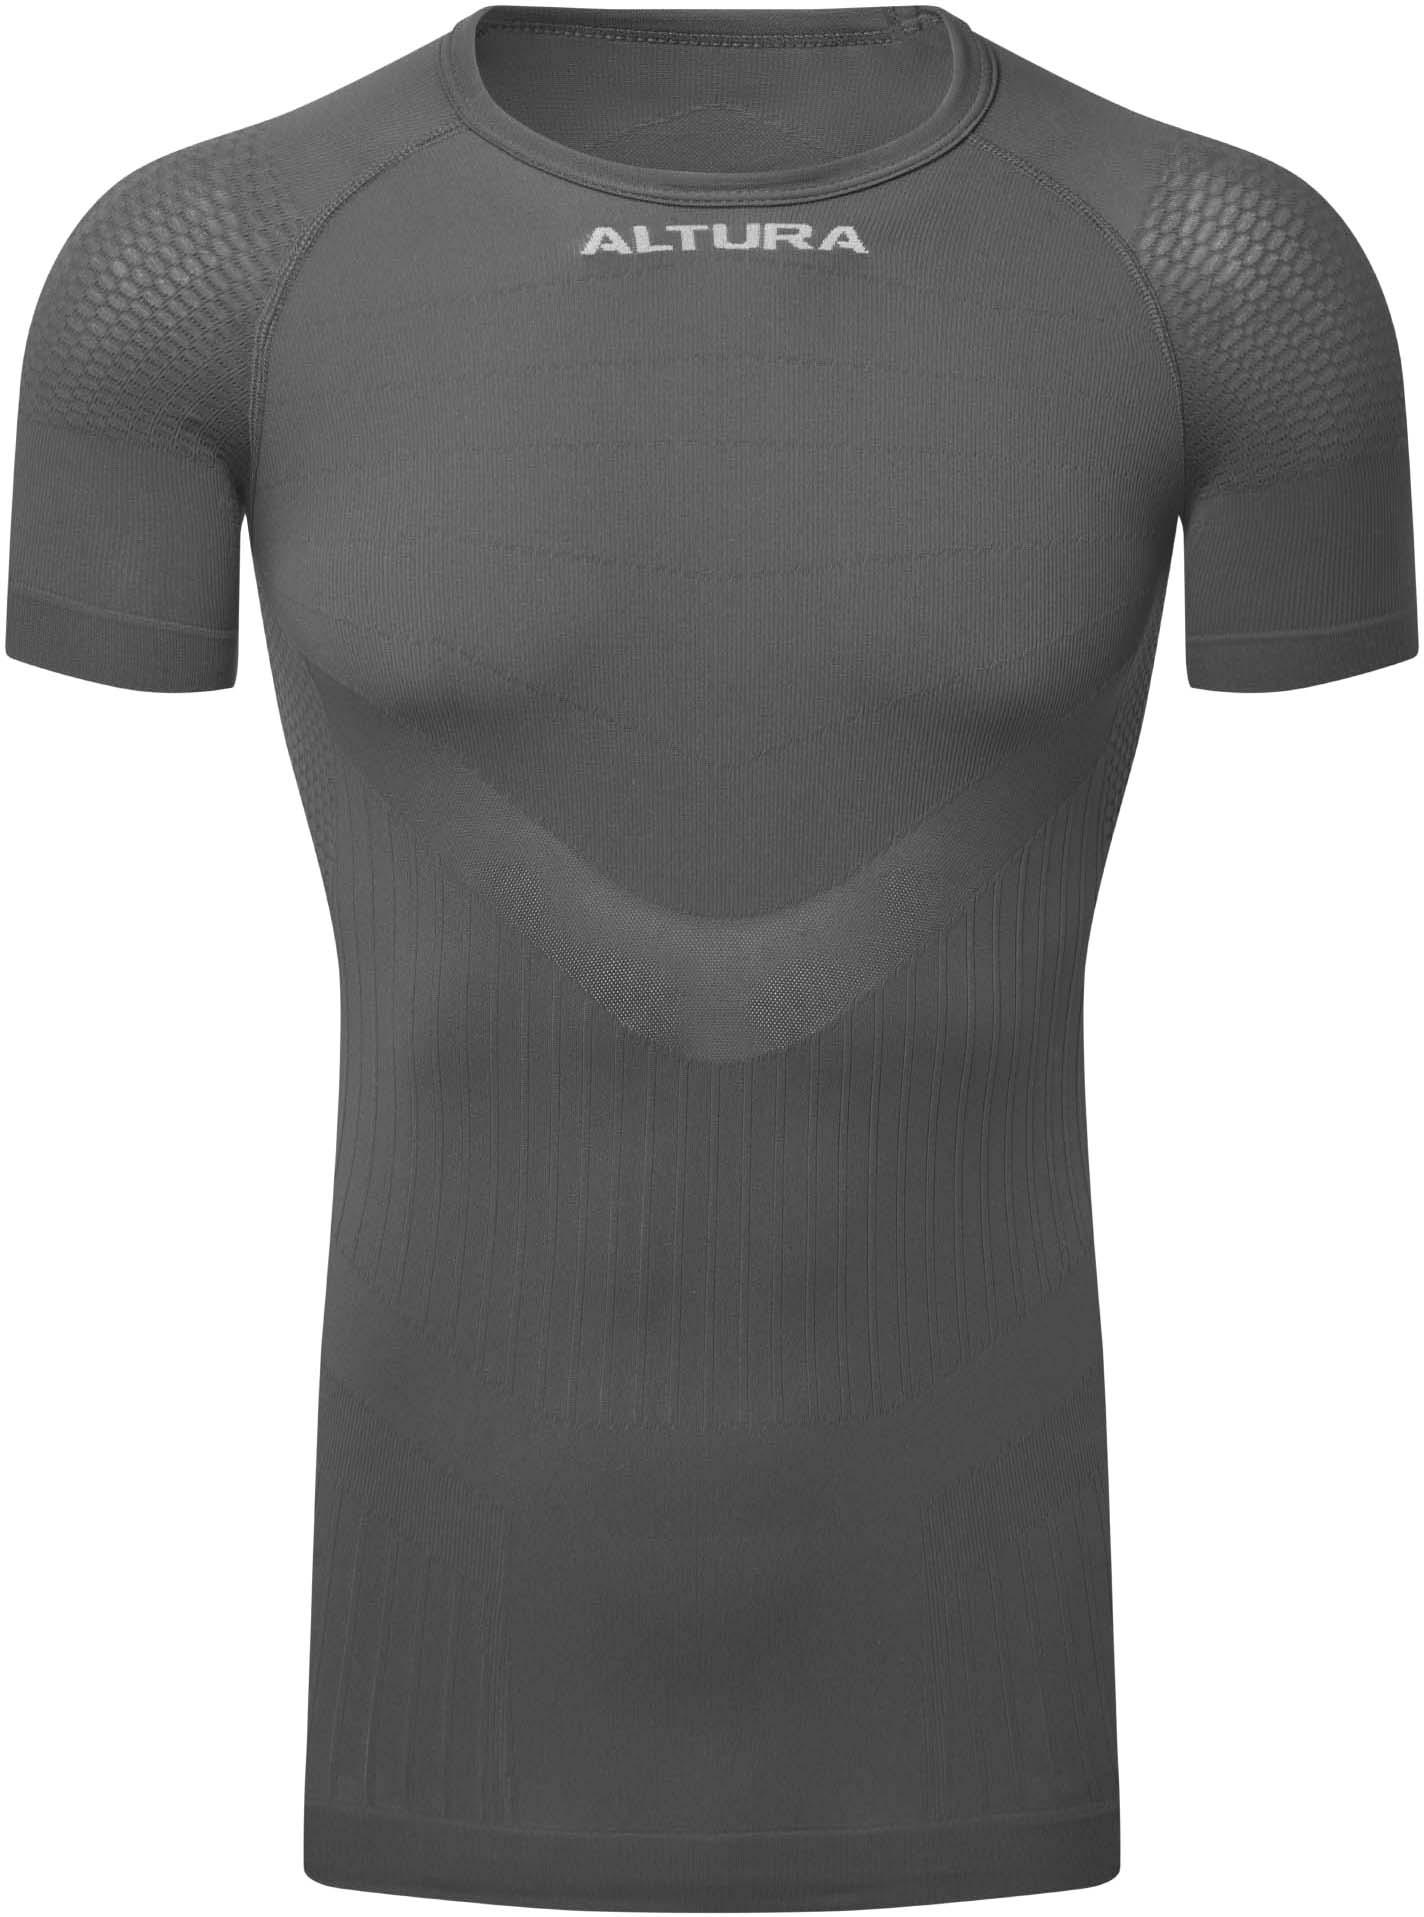 Halfords Altura Tempo Seamless Short Sleeve Base Layer - Charcoal - Xl/Xxl